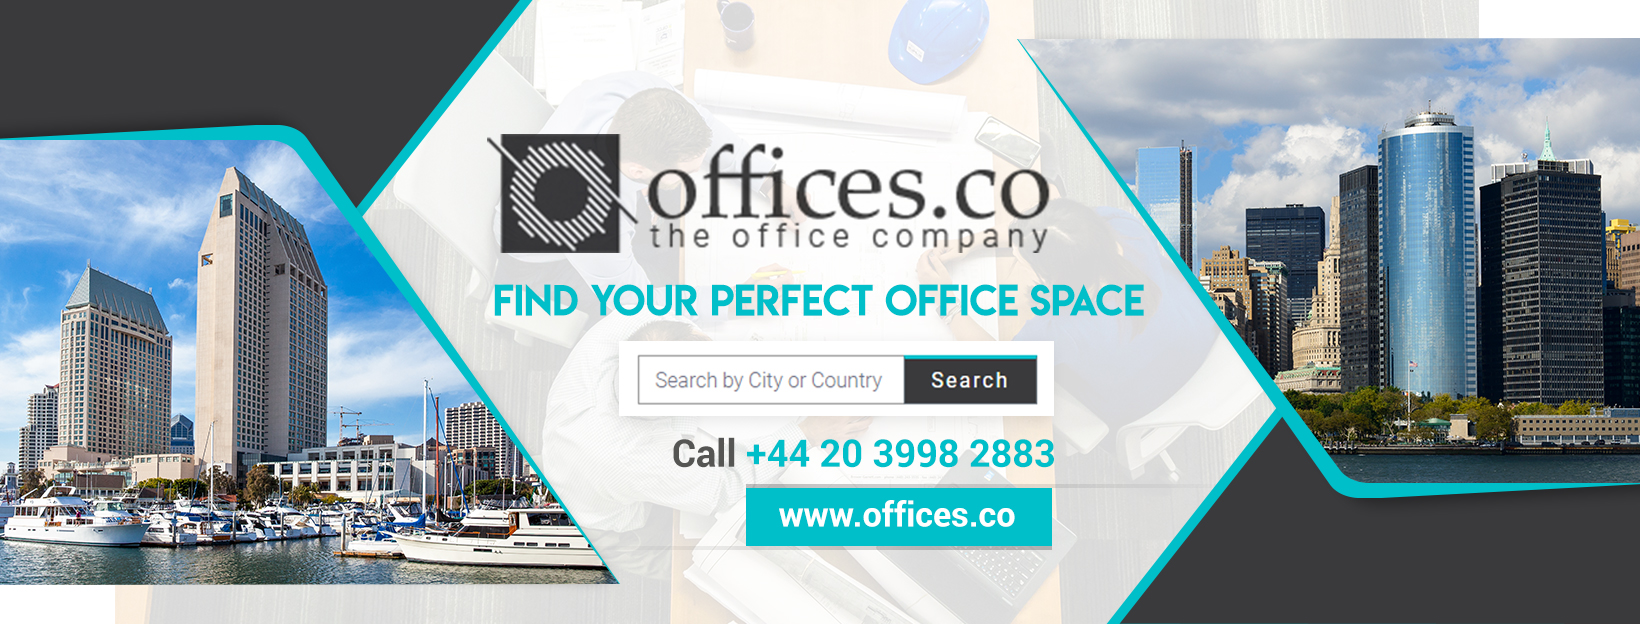 Offices.co